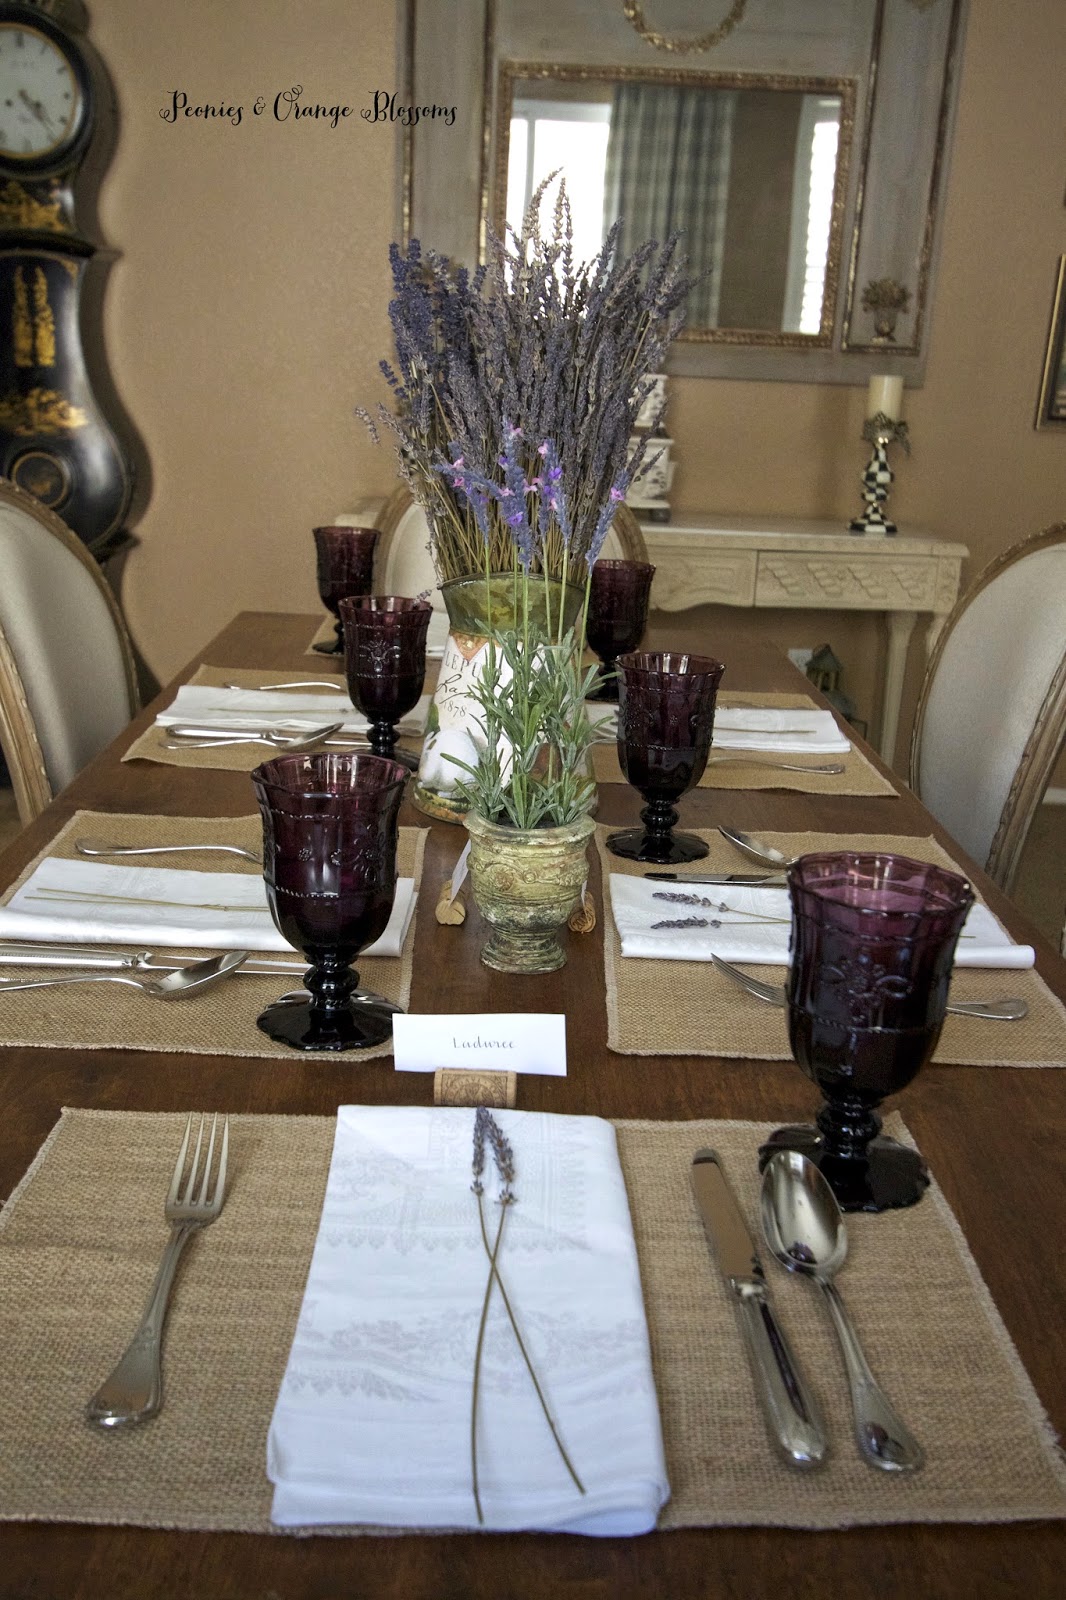 Lavender French Country table with burlap, dried lavender, purple goblets - Peonies and Orange Blossoms